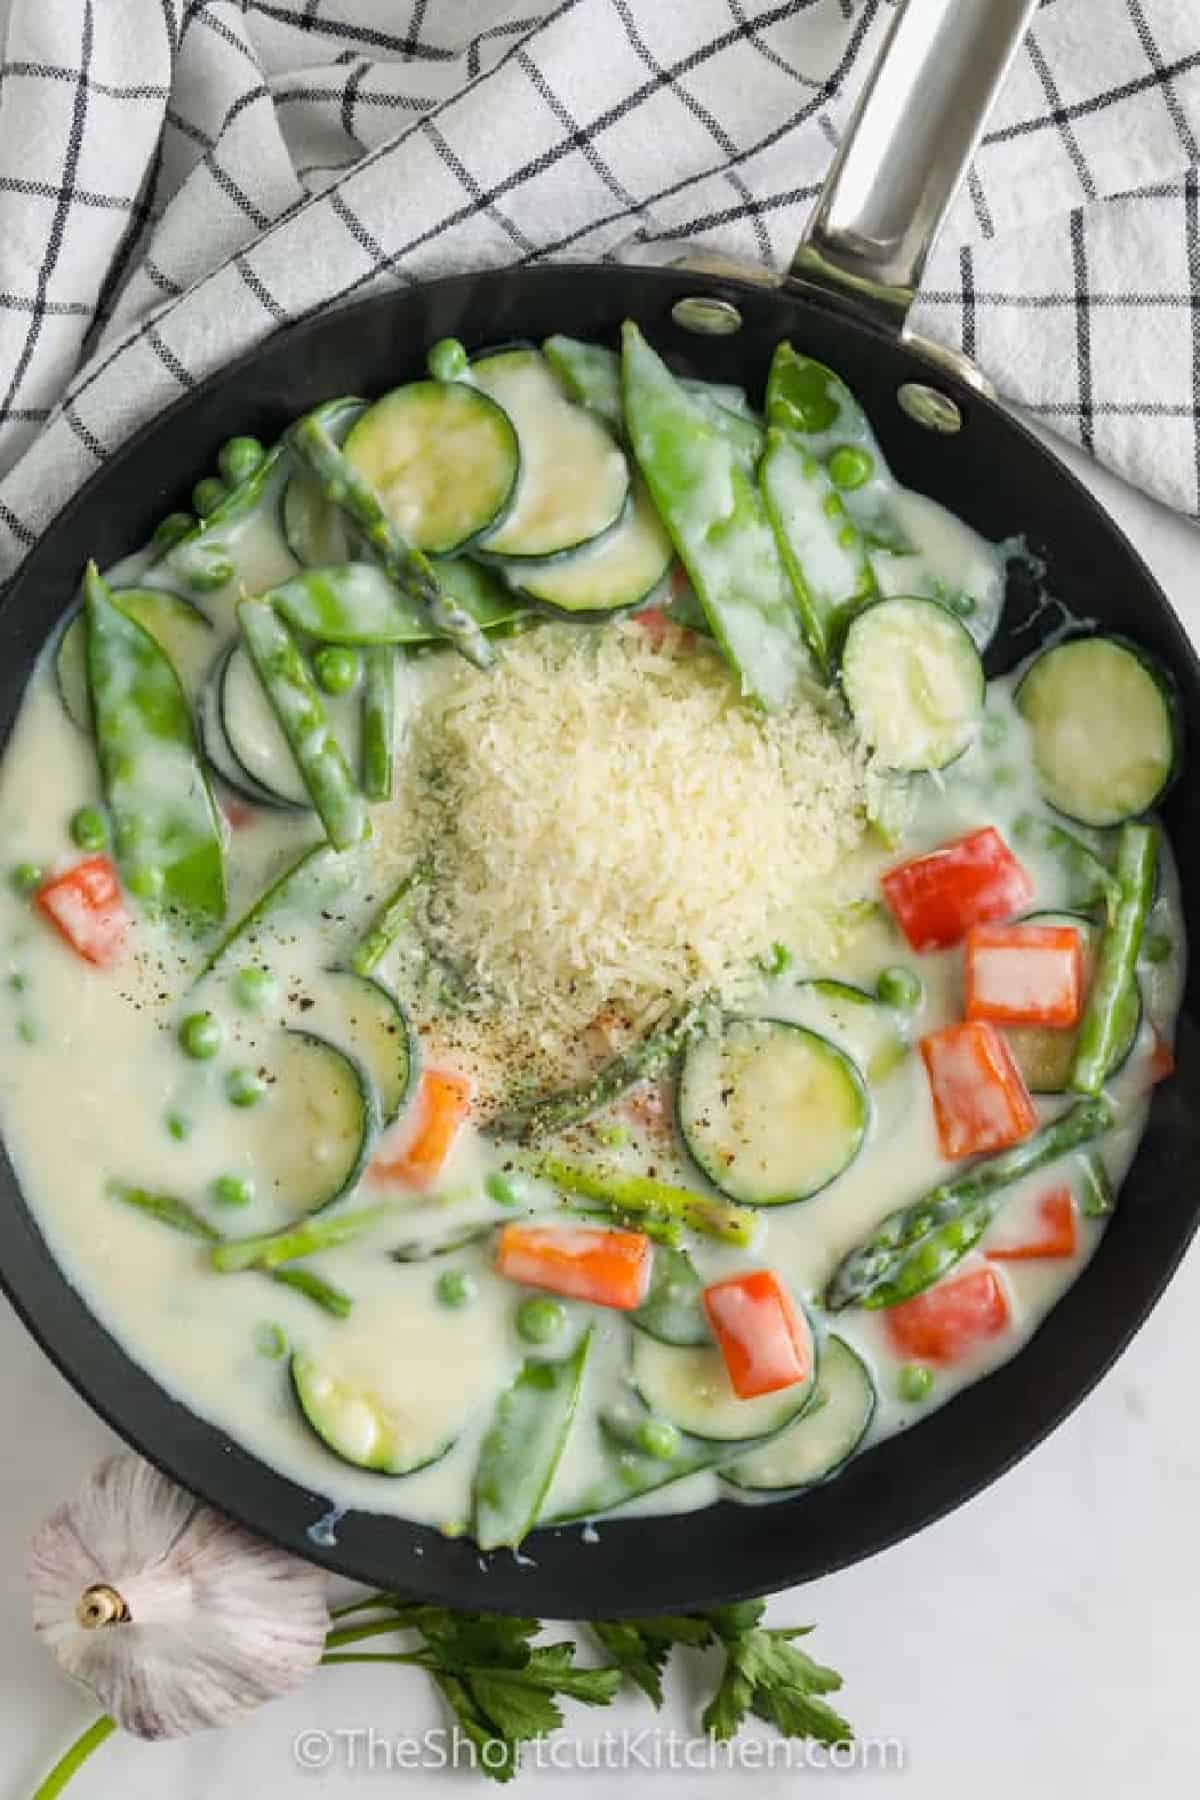 pasta primavera recipe vegetables with a creamy sauce in a frying pan.